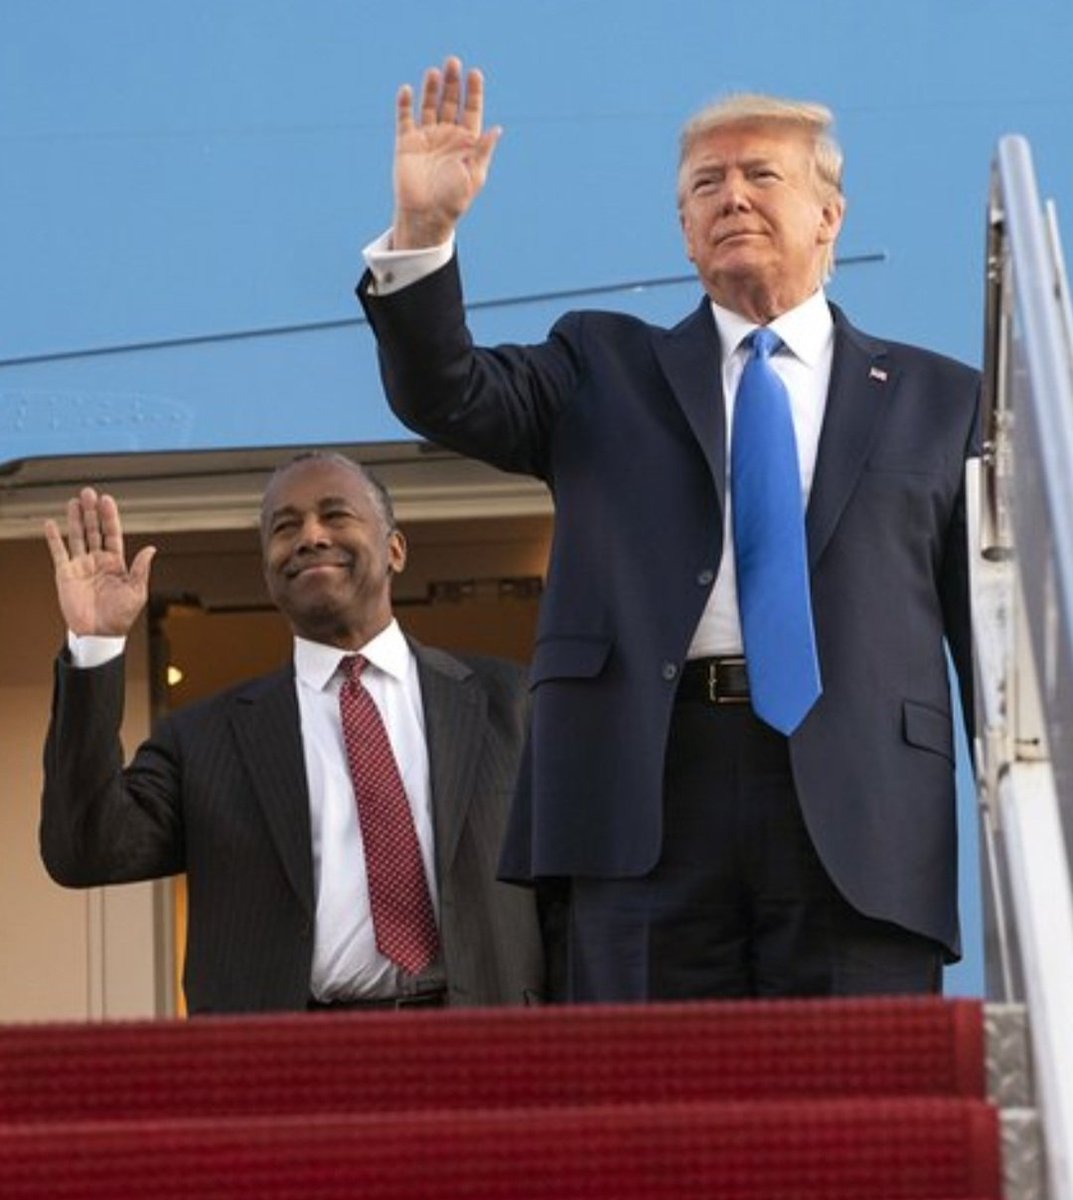 Some believe Ben Carson is too weak or low energy to be Trump's VP. A quick search of his accomplishments proves otherwise. He's a gentle man, soft spoken, slow to anger. That's God's spirit within. Who better to help lead this country than a man who gets his strength from the…